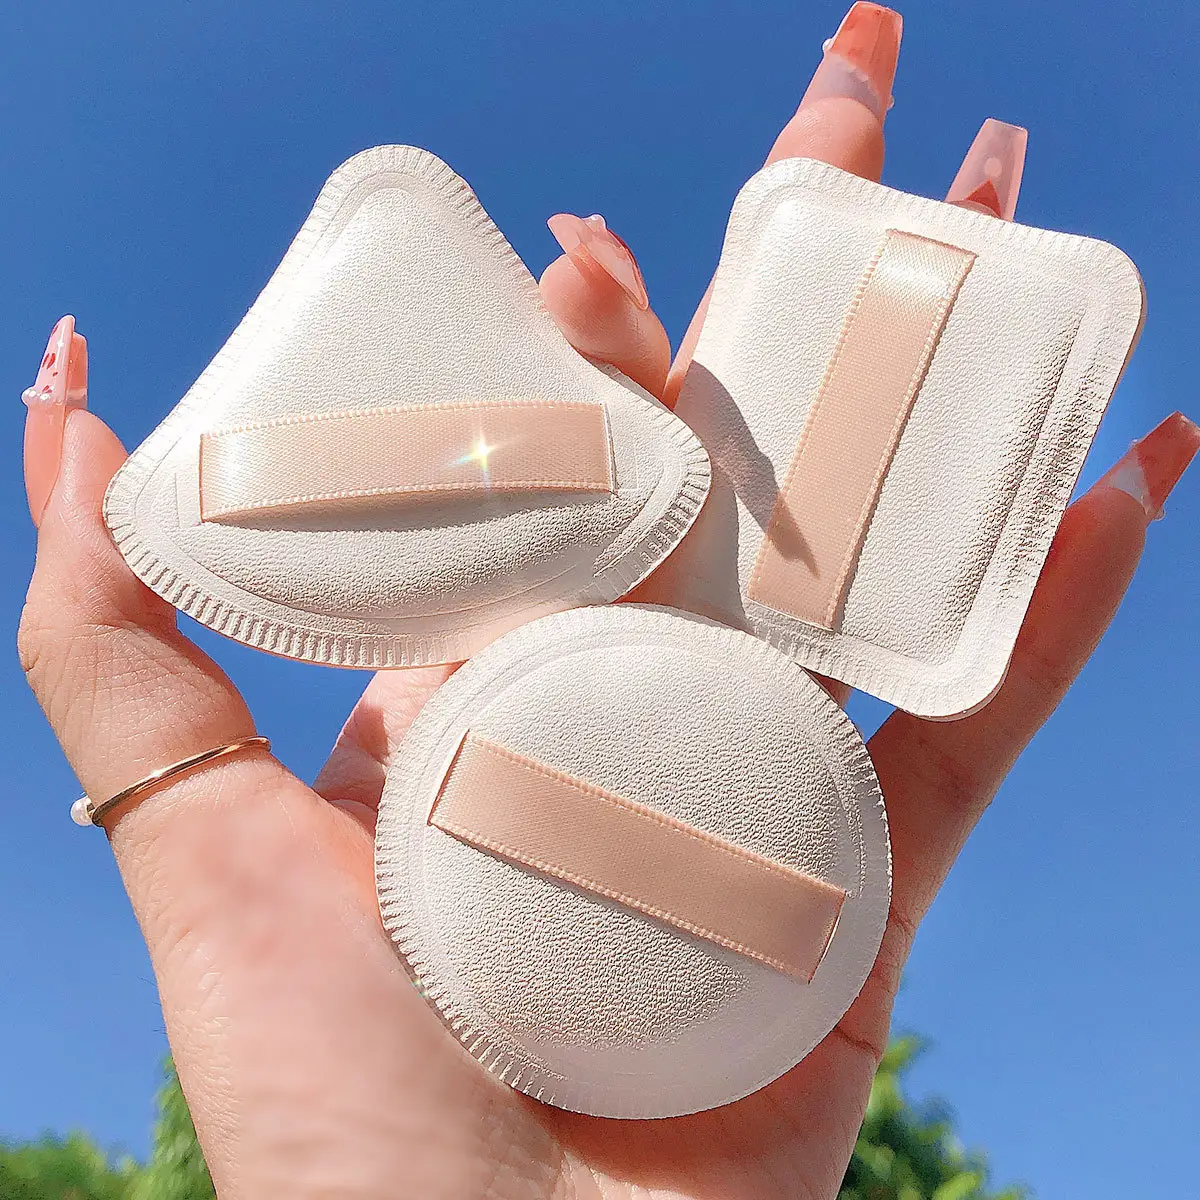 rubycell air cushion puffSoft Beauty Sponge With Case for Liquid blending Foundations, Powders, Creams, Concealer